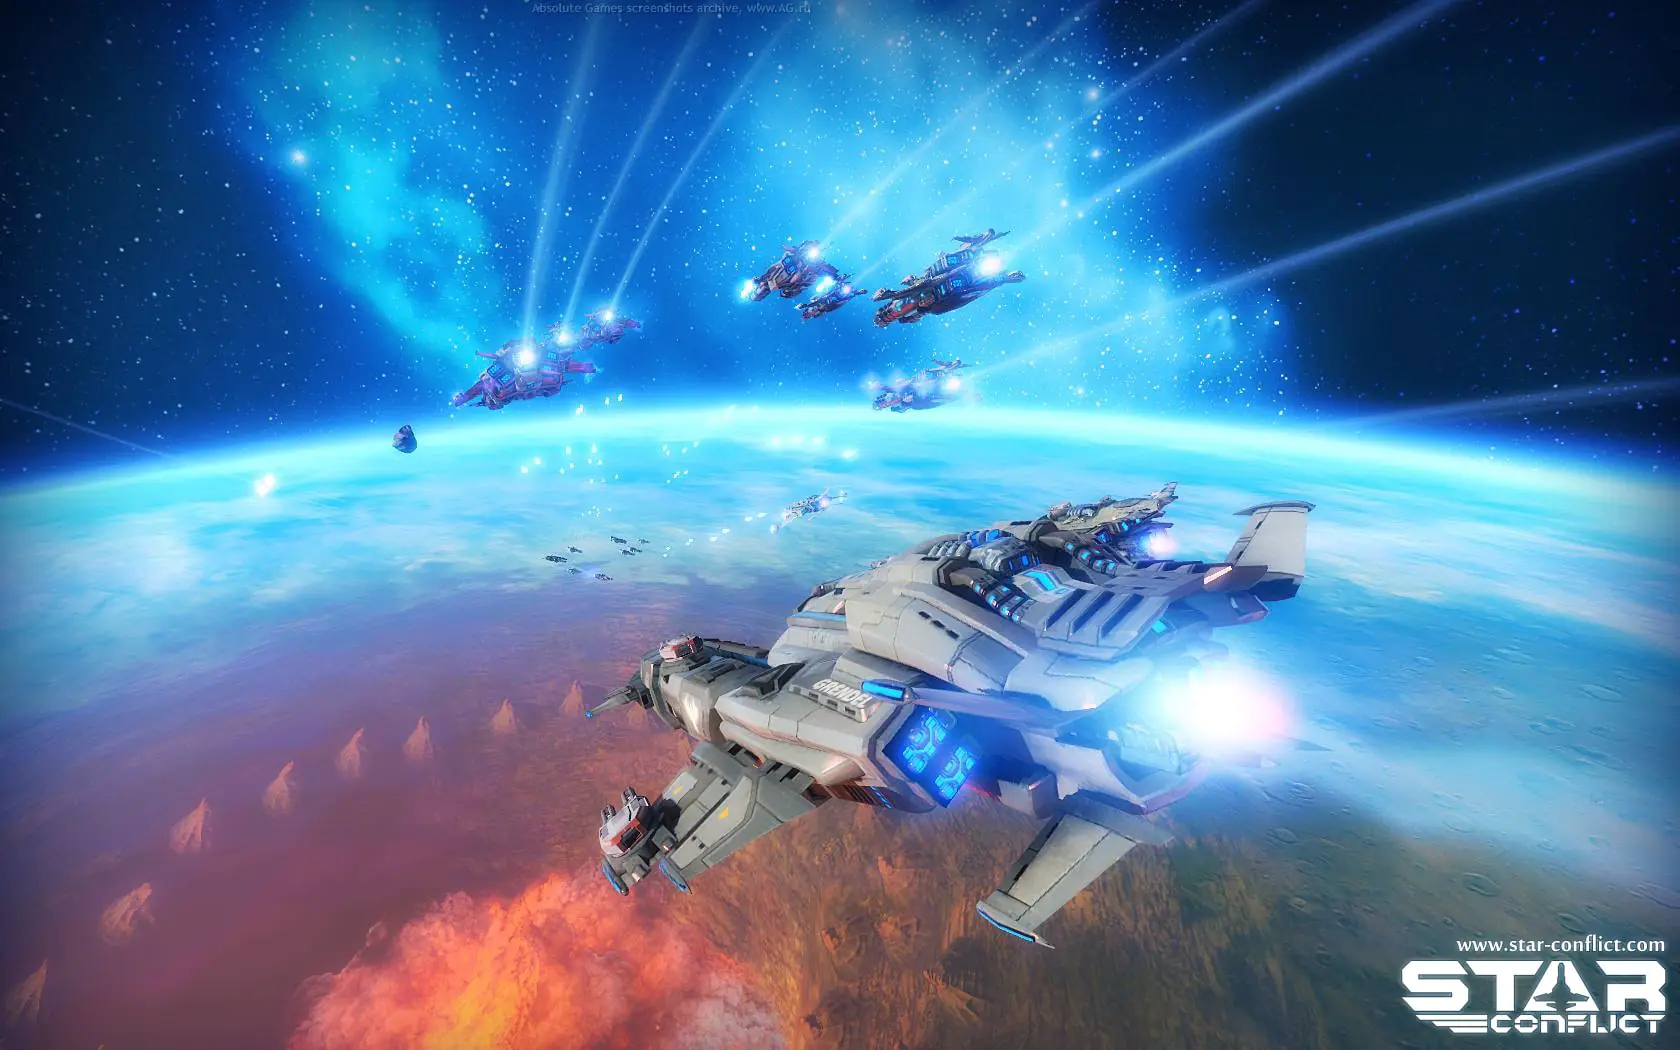 Star Conflict image 2